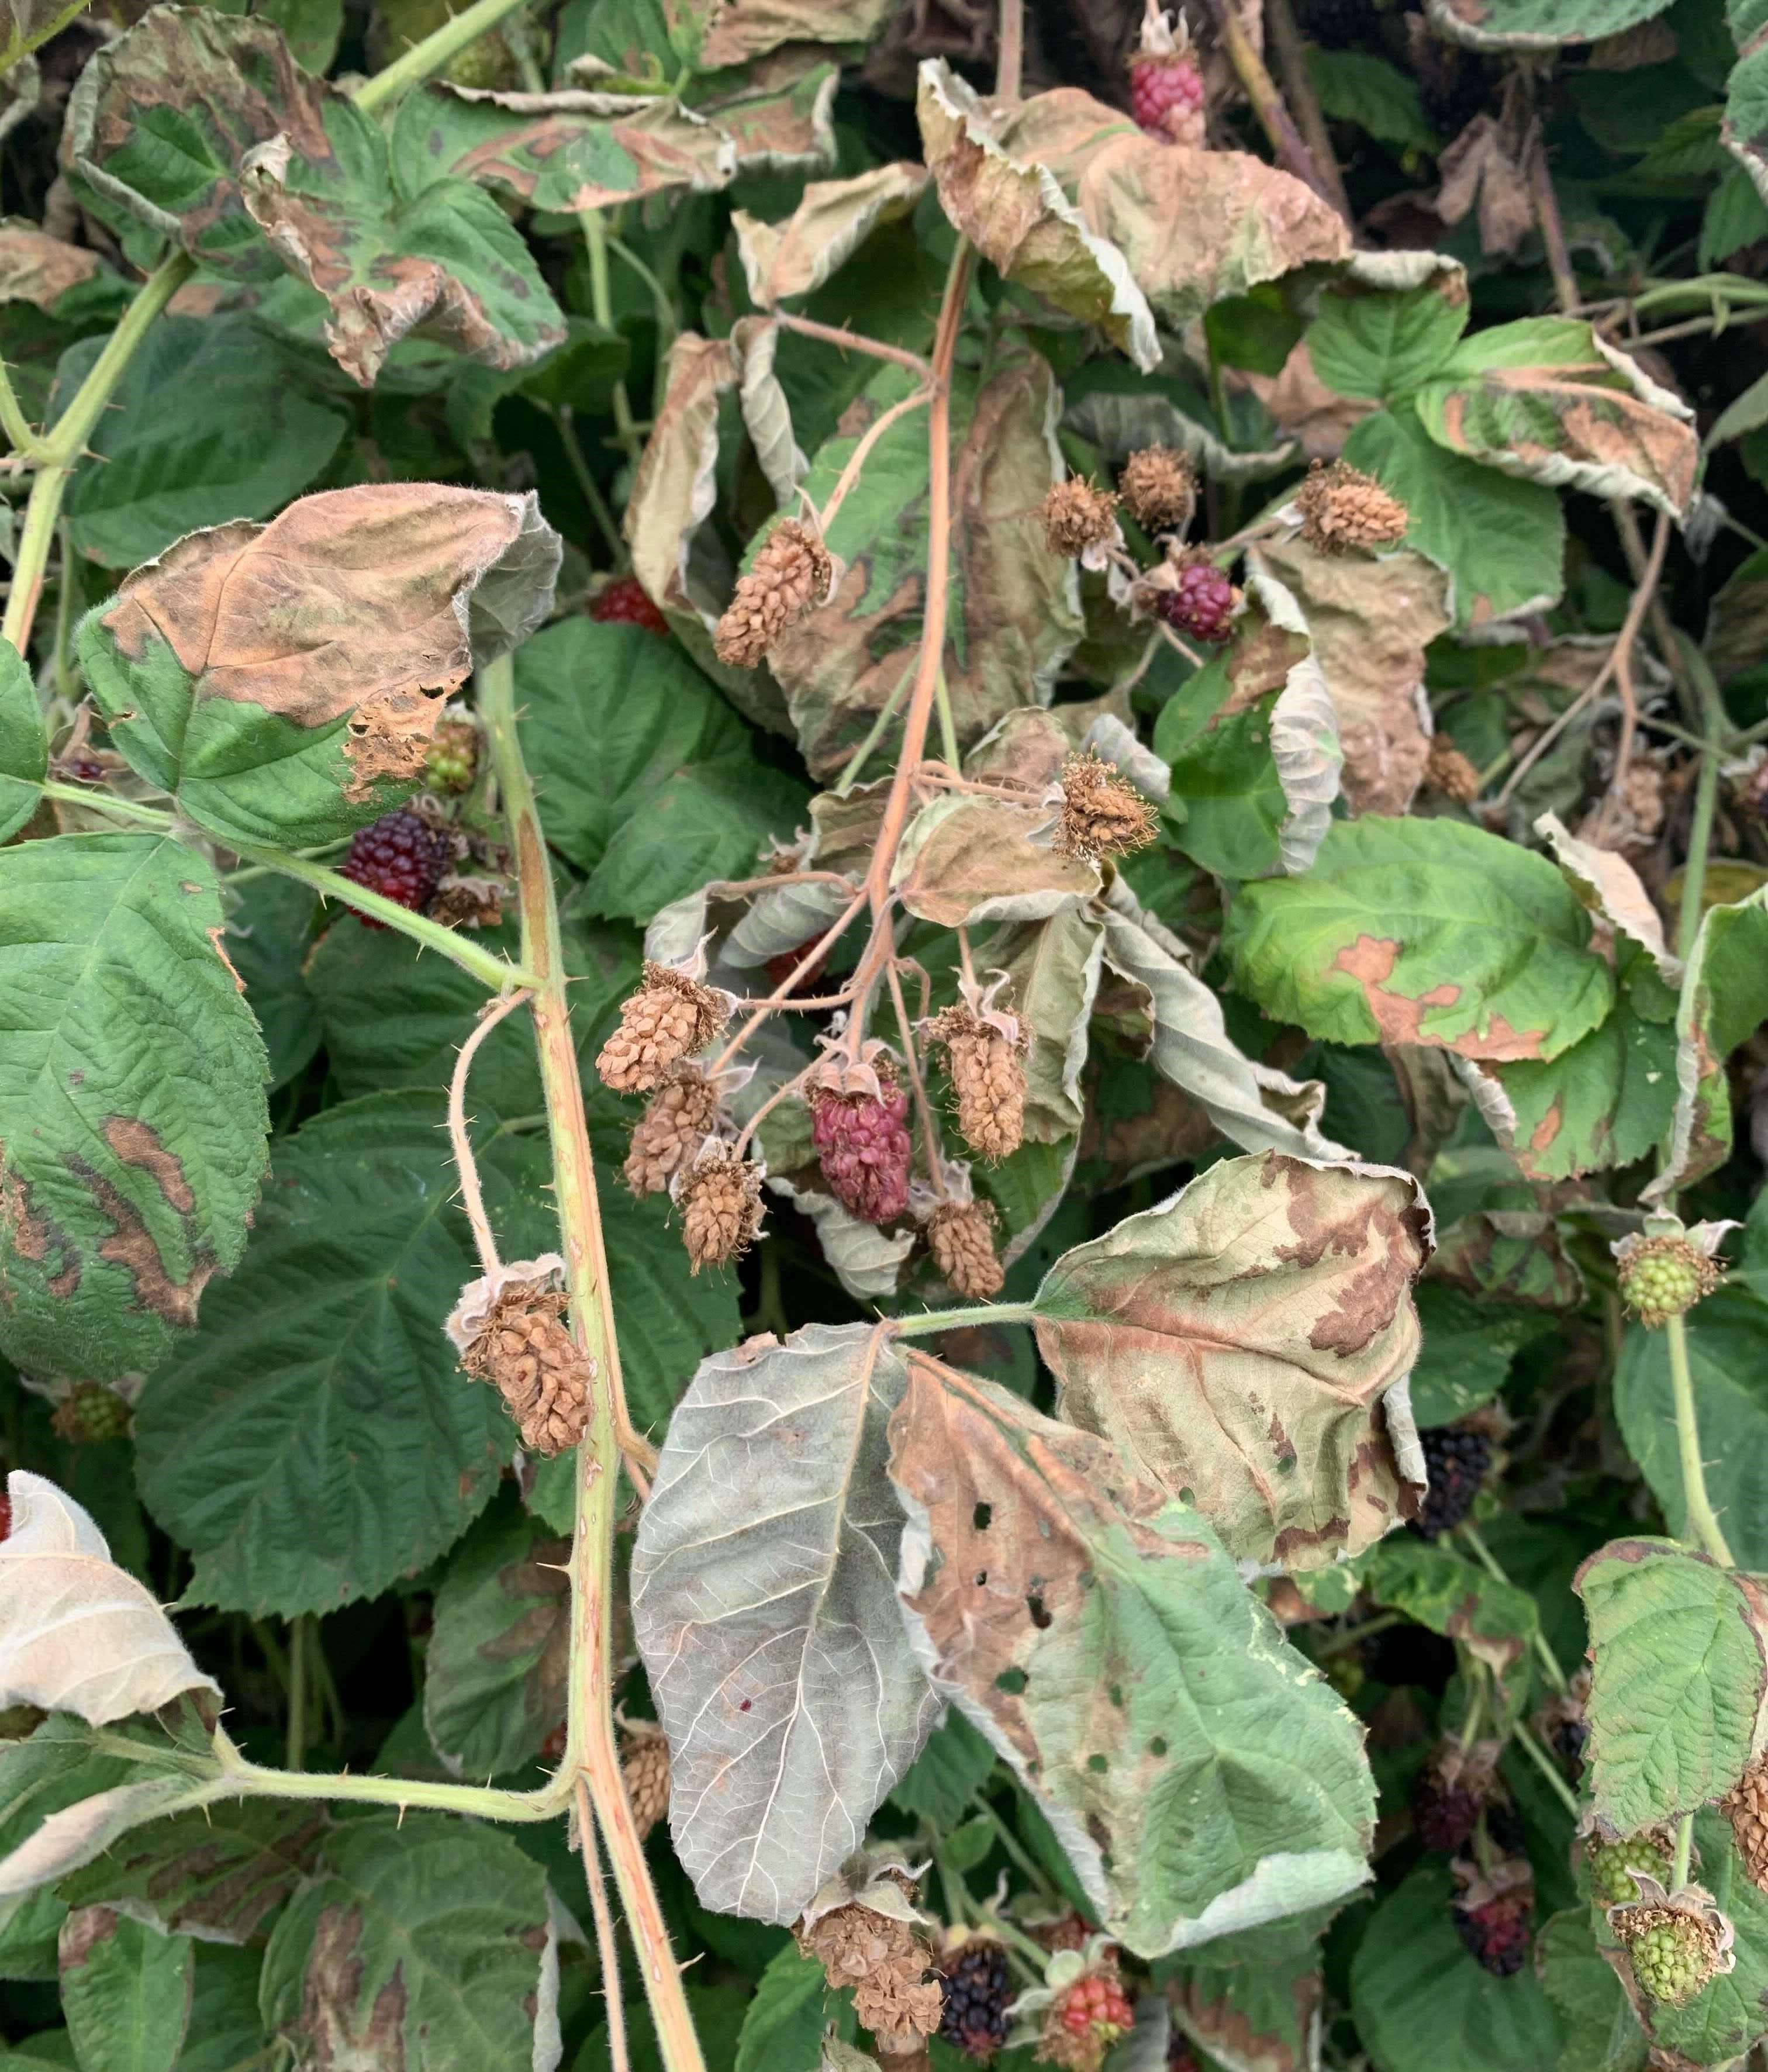 Blackberries and raspberries in Oregon sustained mass damage from the heat dome event of earlier this week. Growers say they won’t be sure of all the damage until next year’s crop comes on. Courtesy of Oregon Blackberry Raspberry Commission